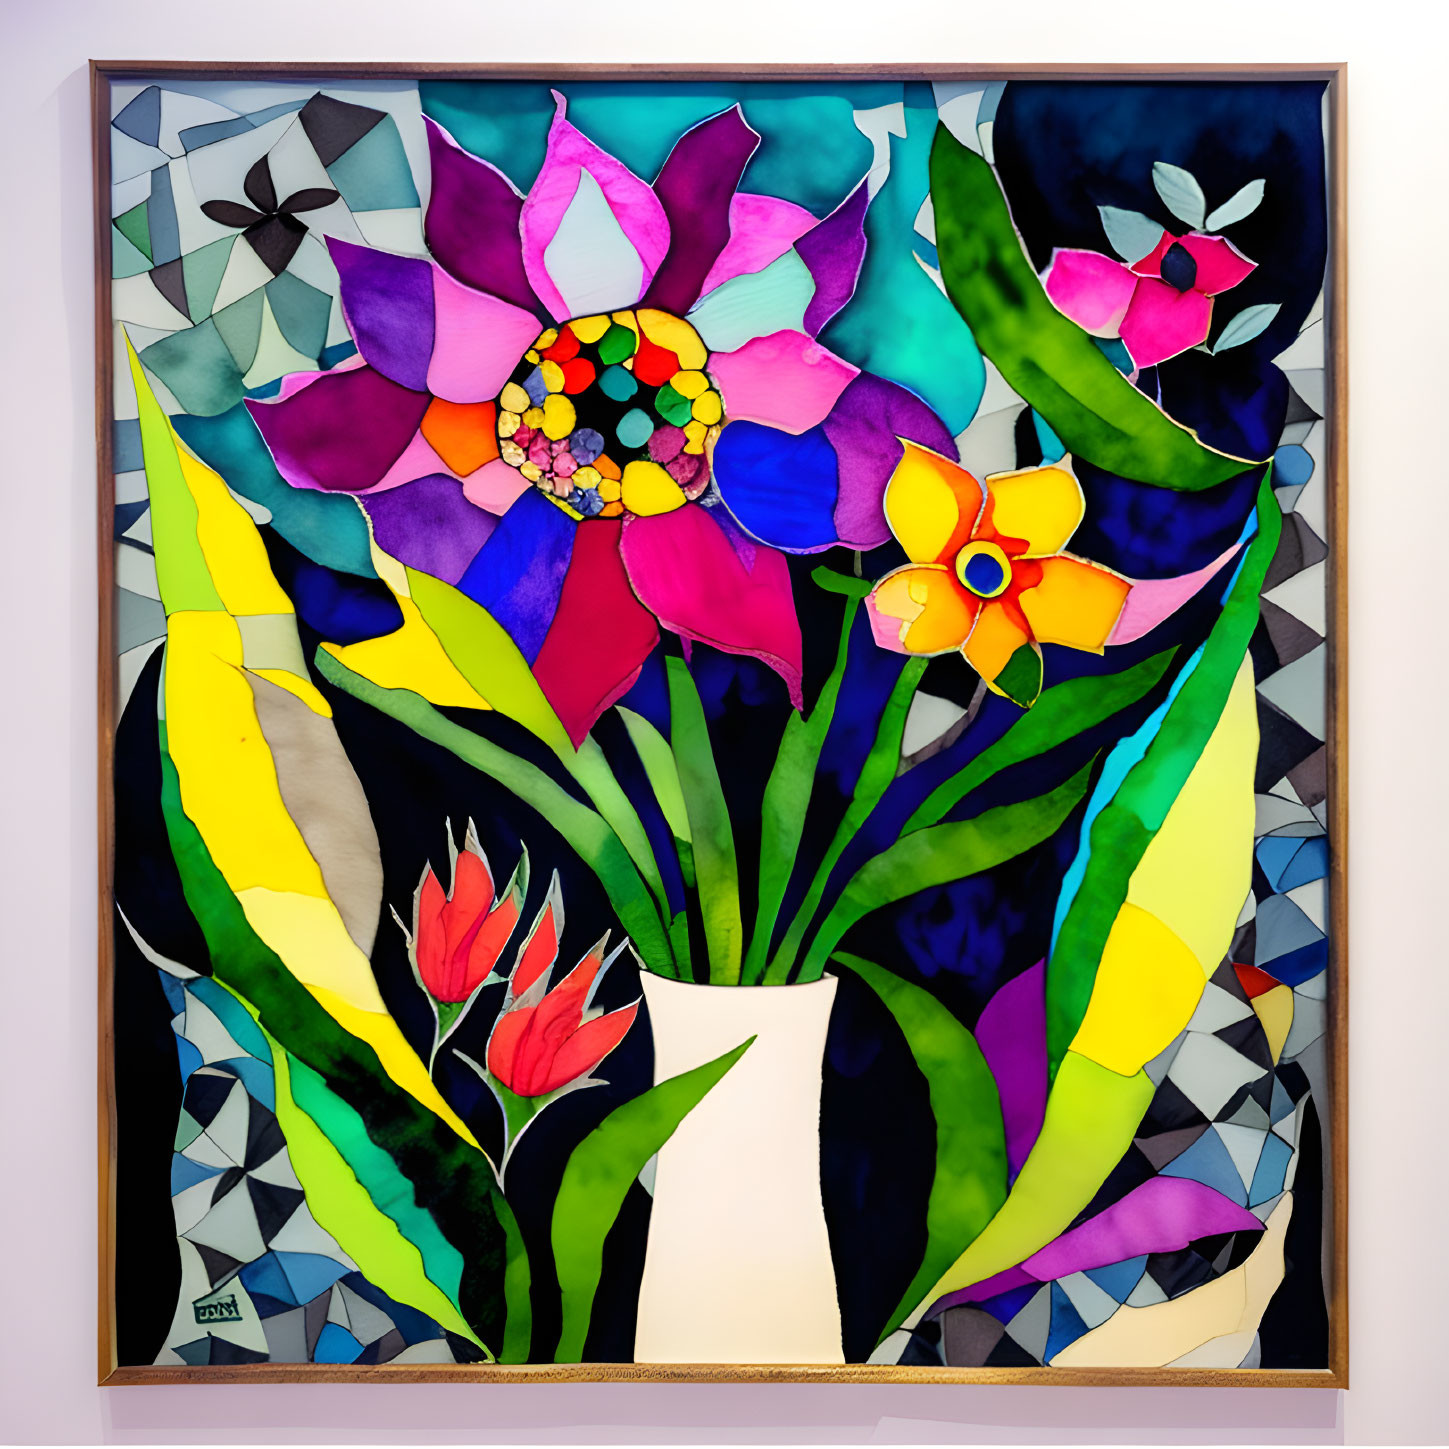 Vibrant bouquet of flowers in stained glass-style artwork